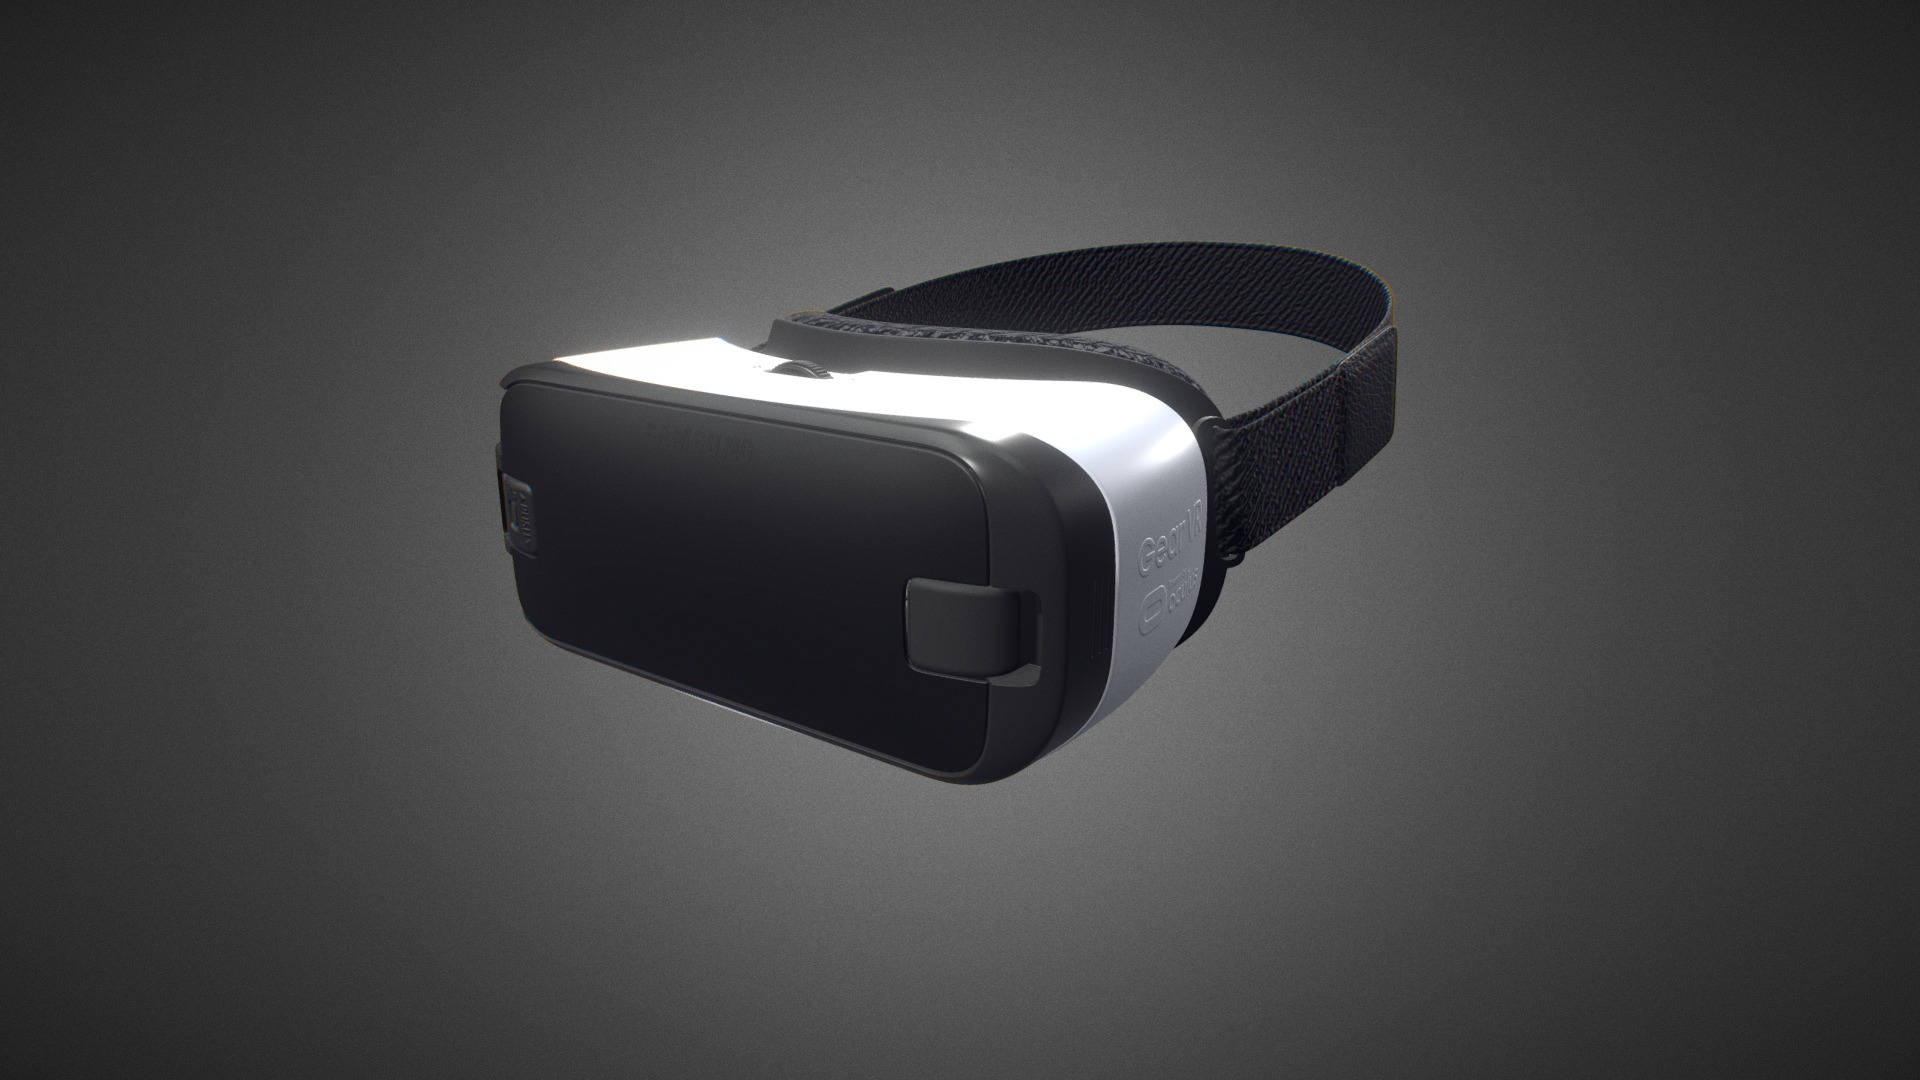 3D model Samsung Gear VR 2016 for Element 3D - This is a 3D model of the Samsung Gear VR 2016 for Element 3D. The 3D model is about a black and silver electronic device.